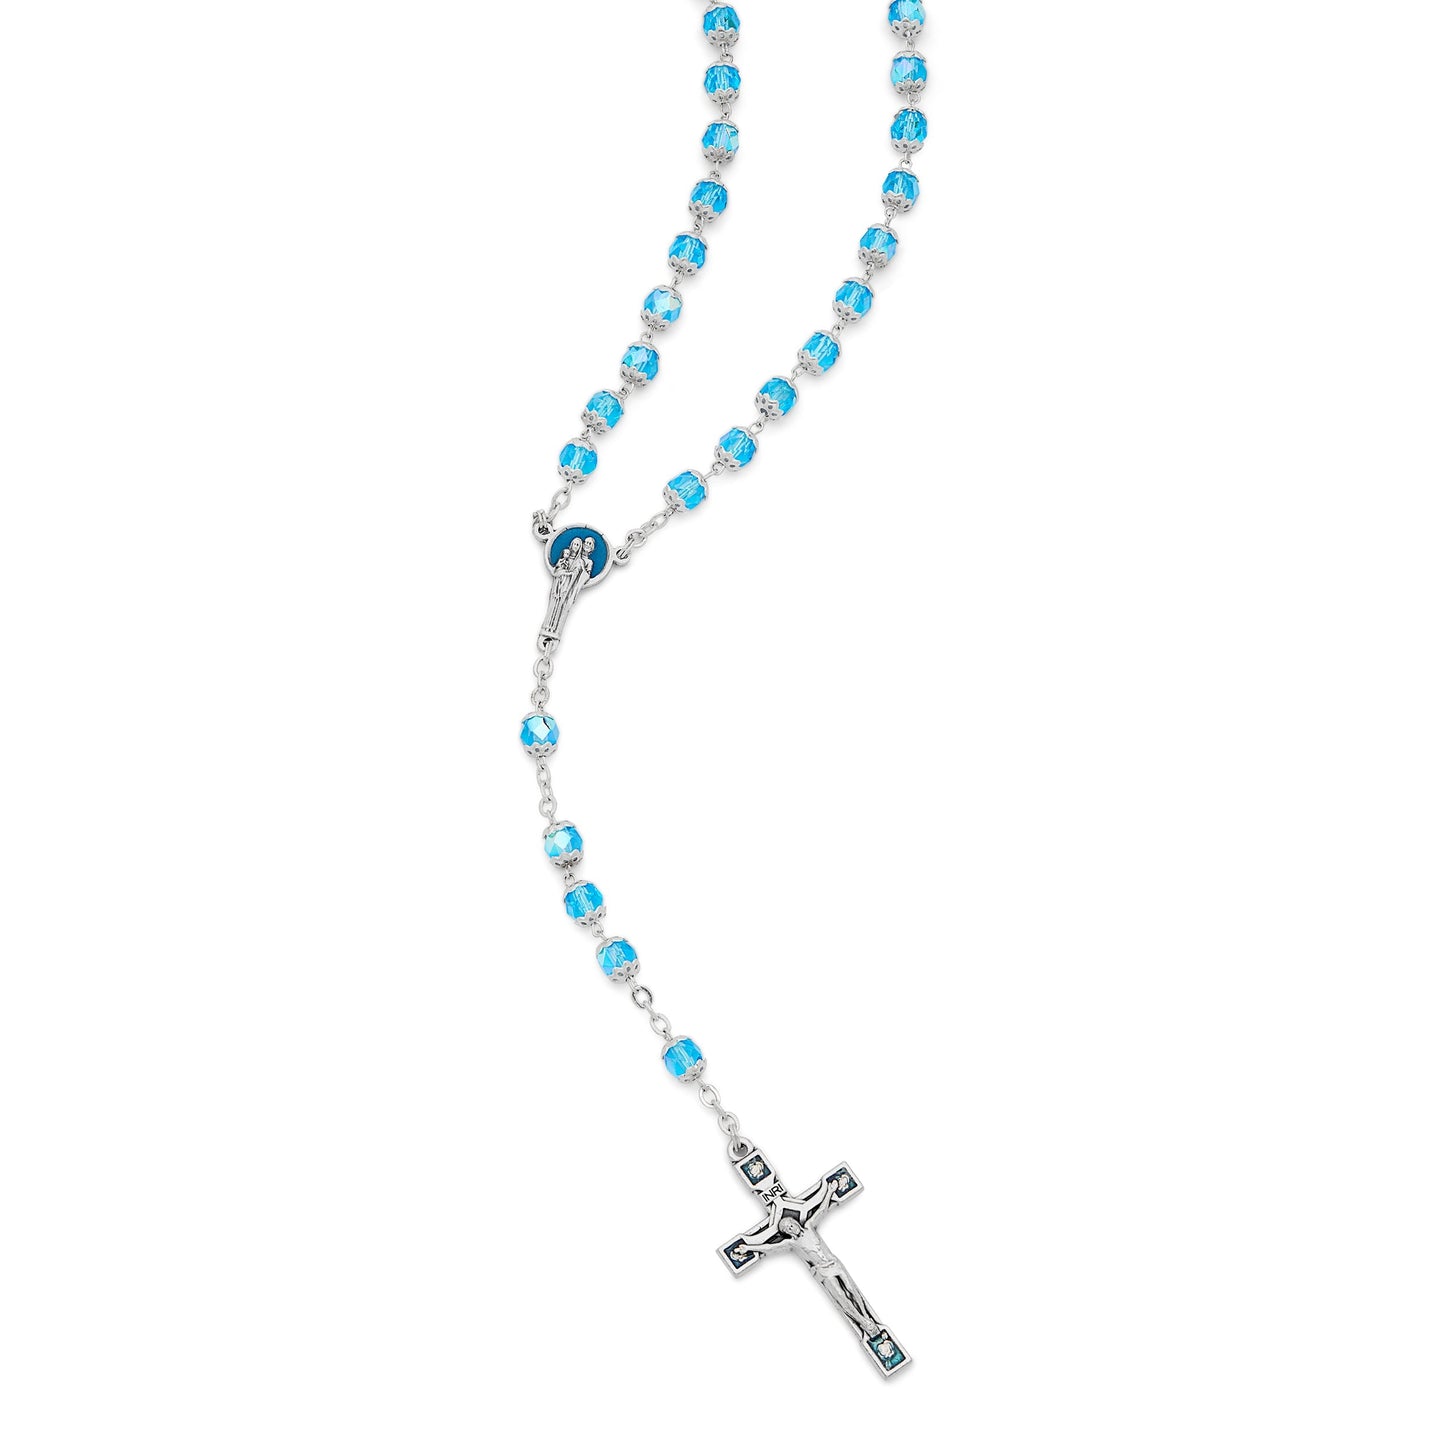 MONDO CATTOLICO Prayer Beads Holy Family Rosary in Faceted Crystal Beads